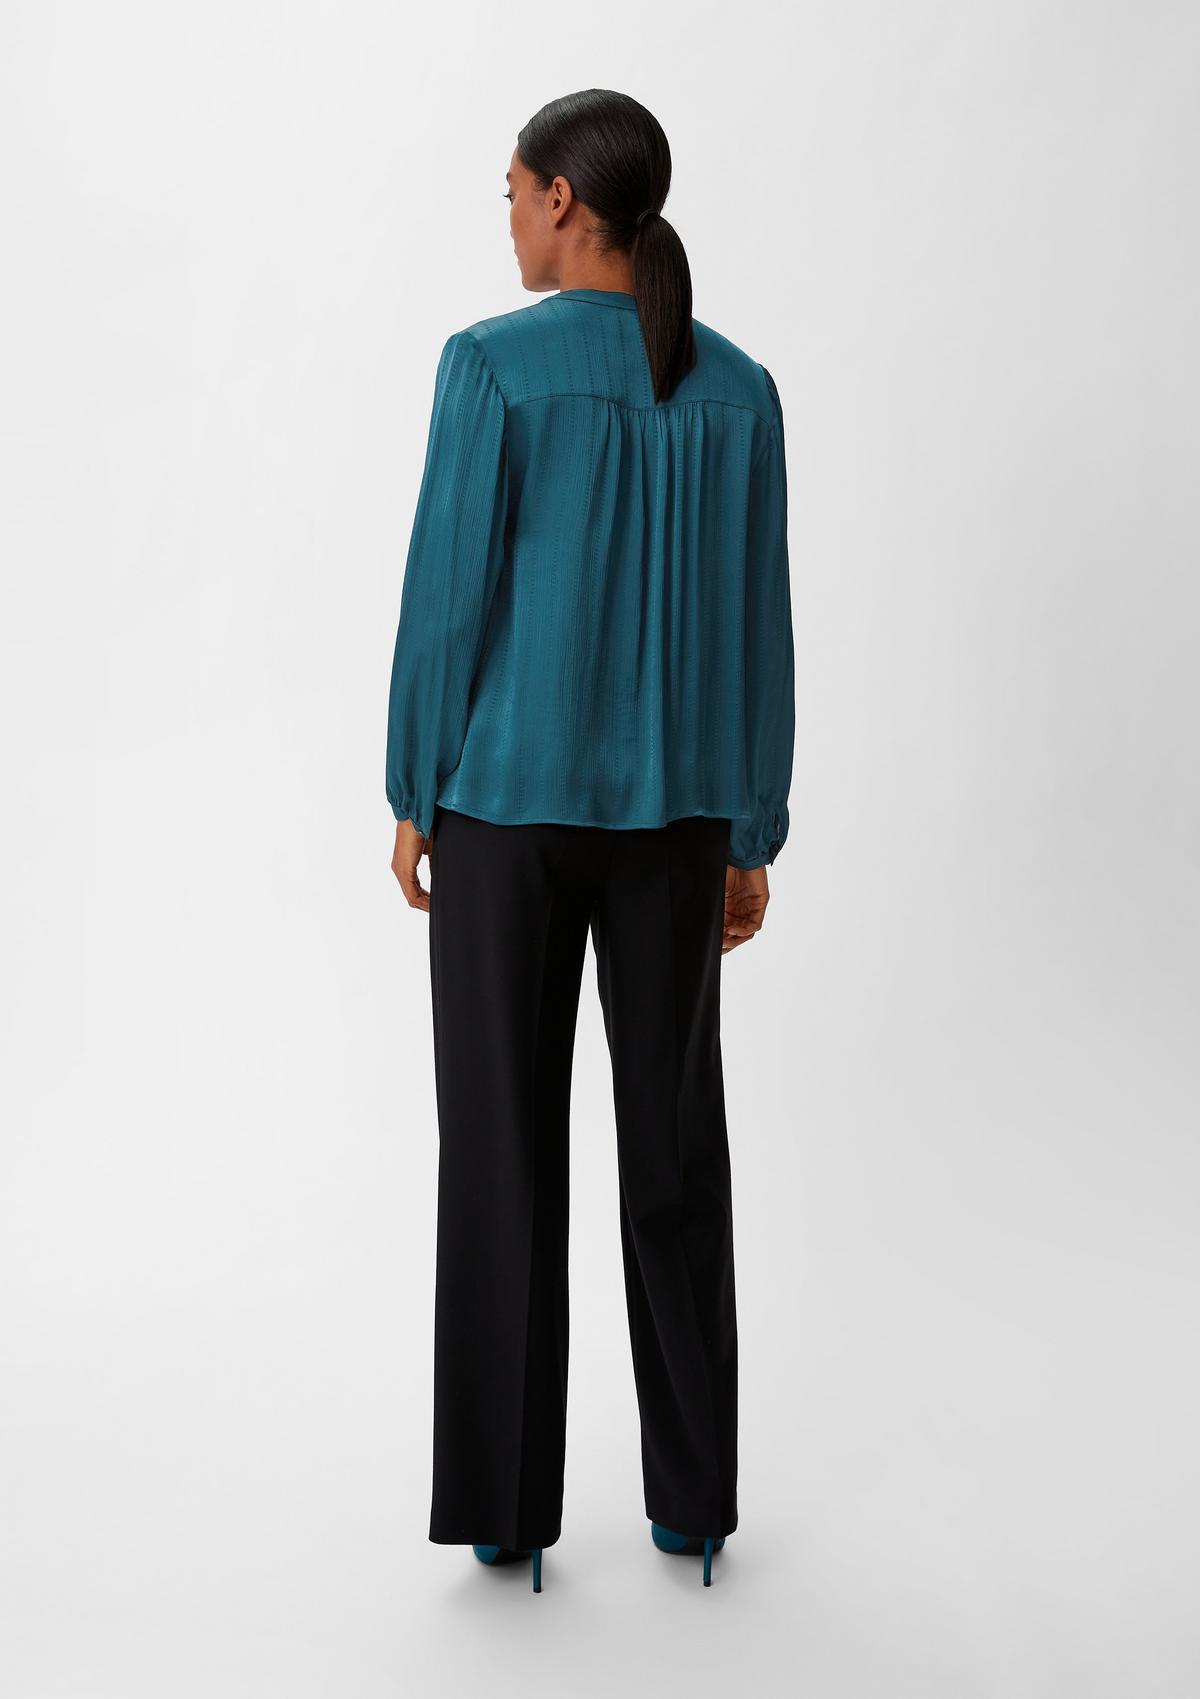 Satin blouse with a patterned texture - petrol | Comma